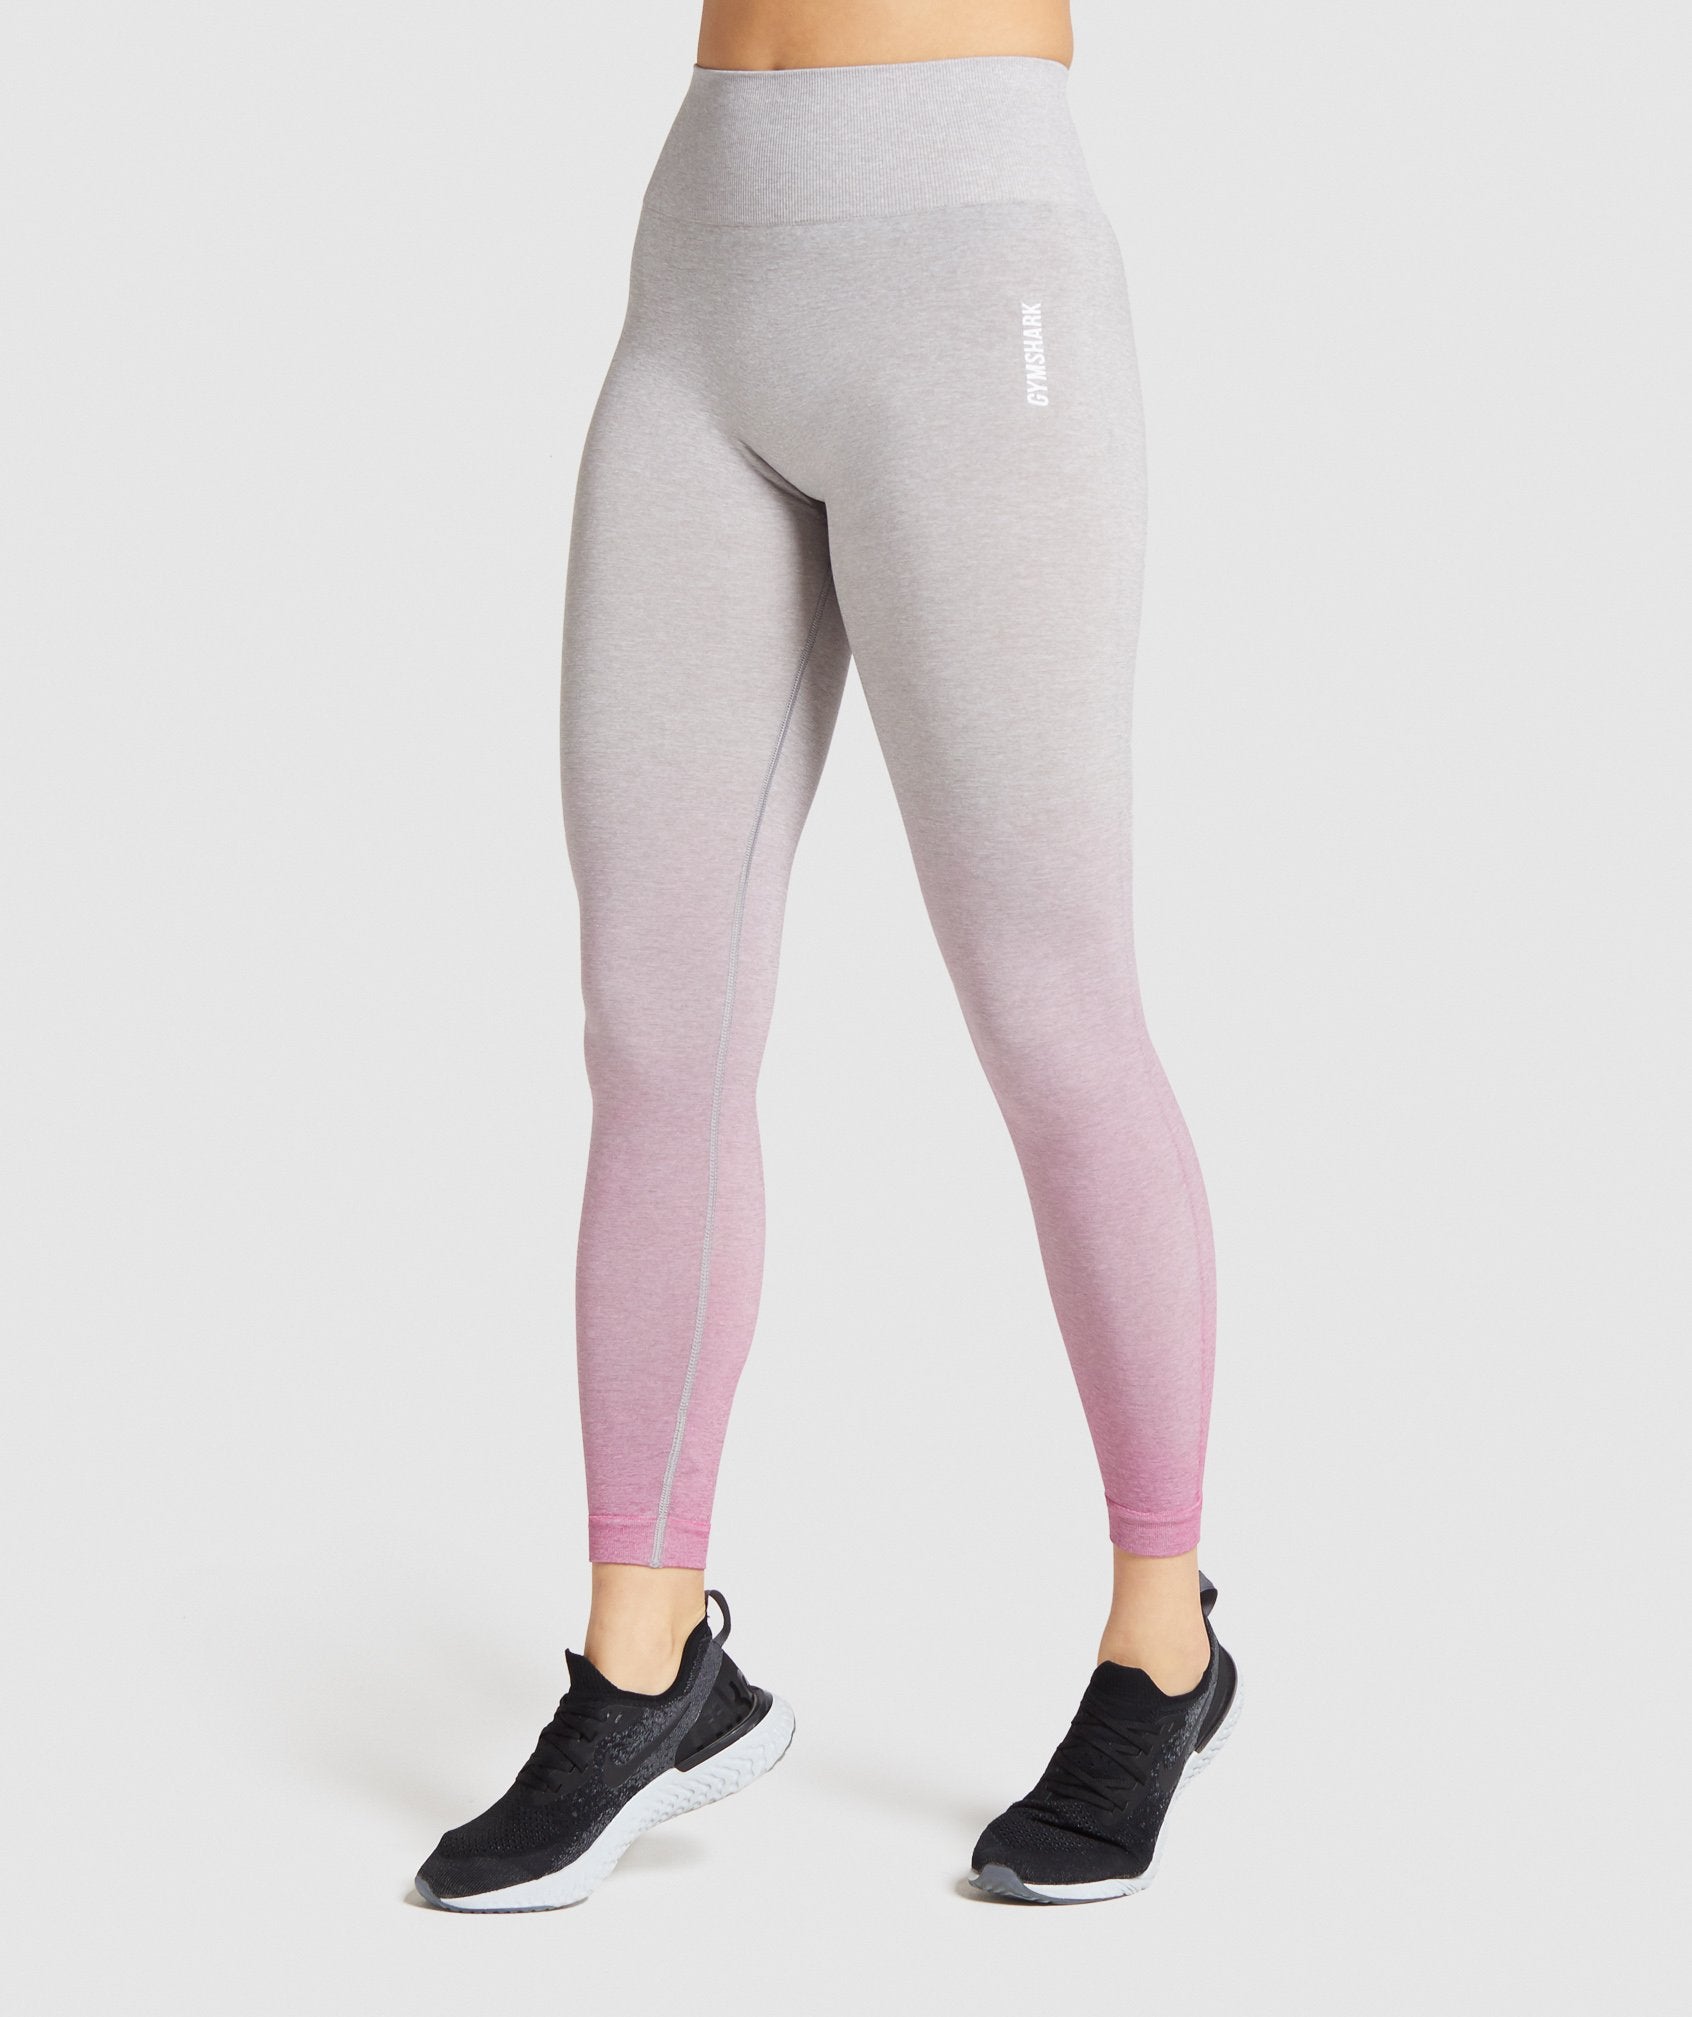 Gymshark Adapt Ombre Seamless Womens Long Training Tights - Grey